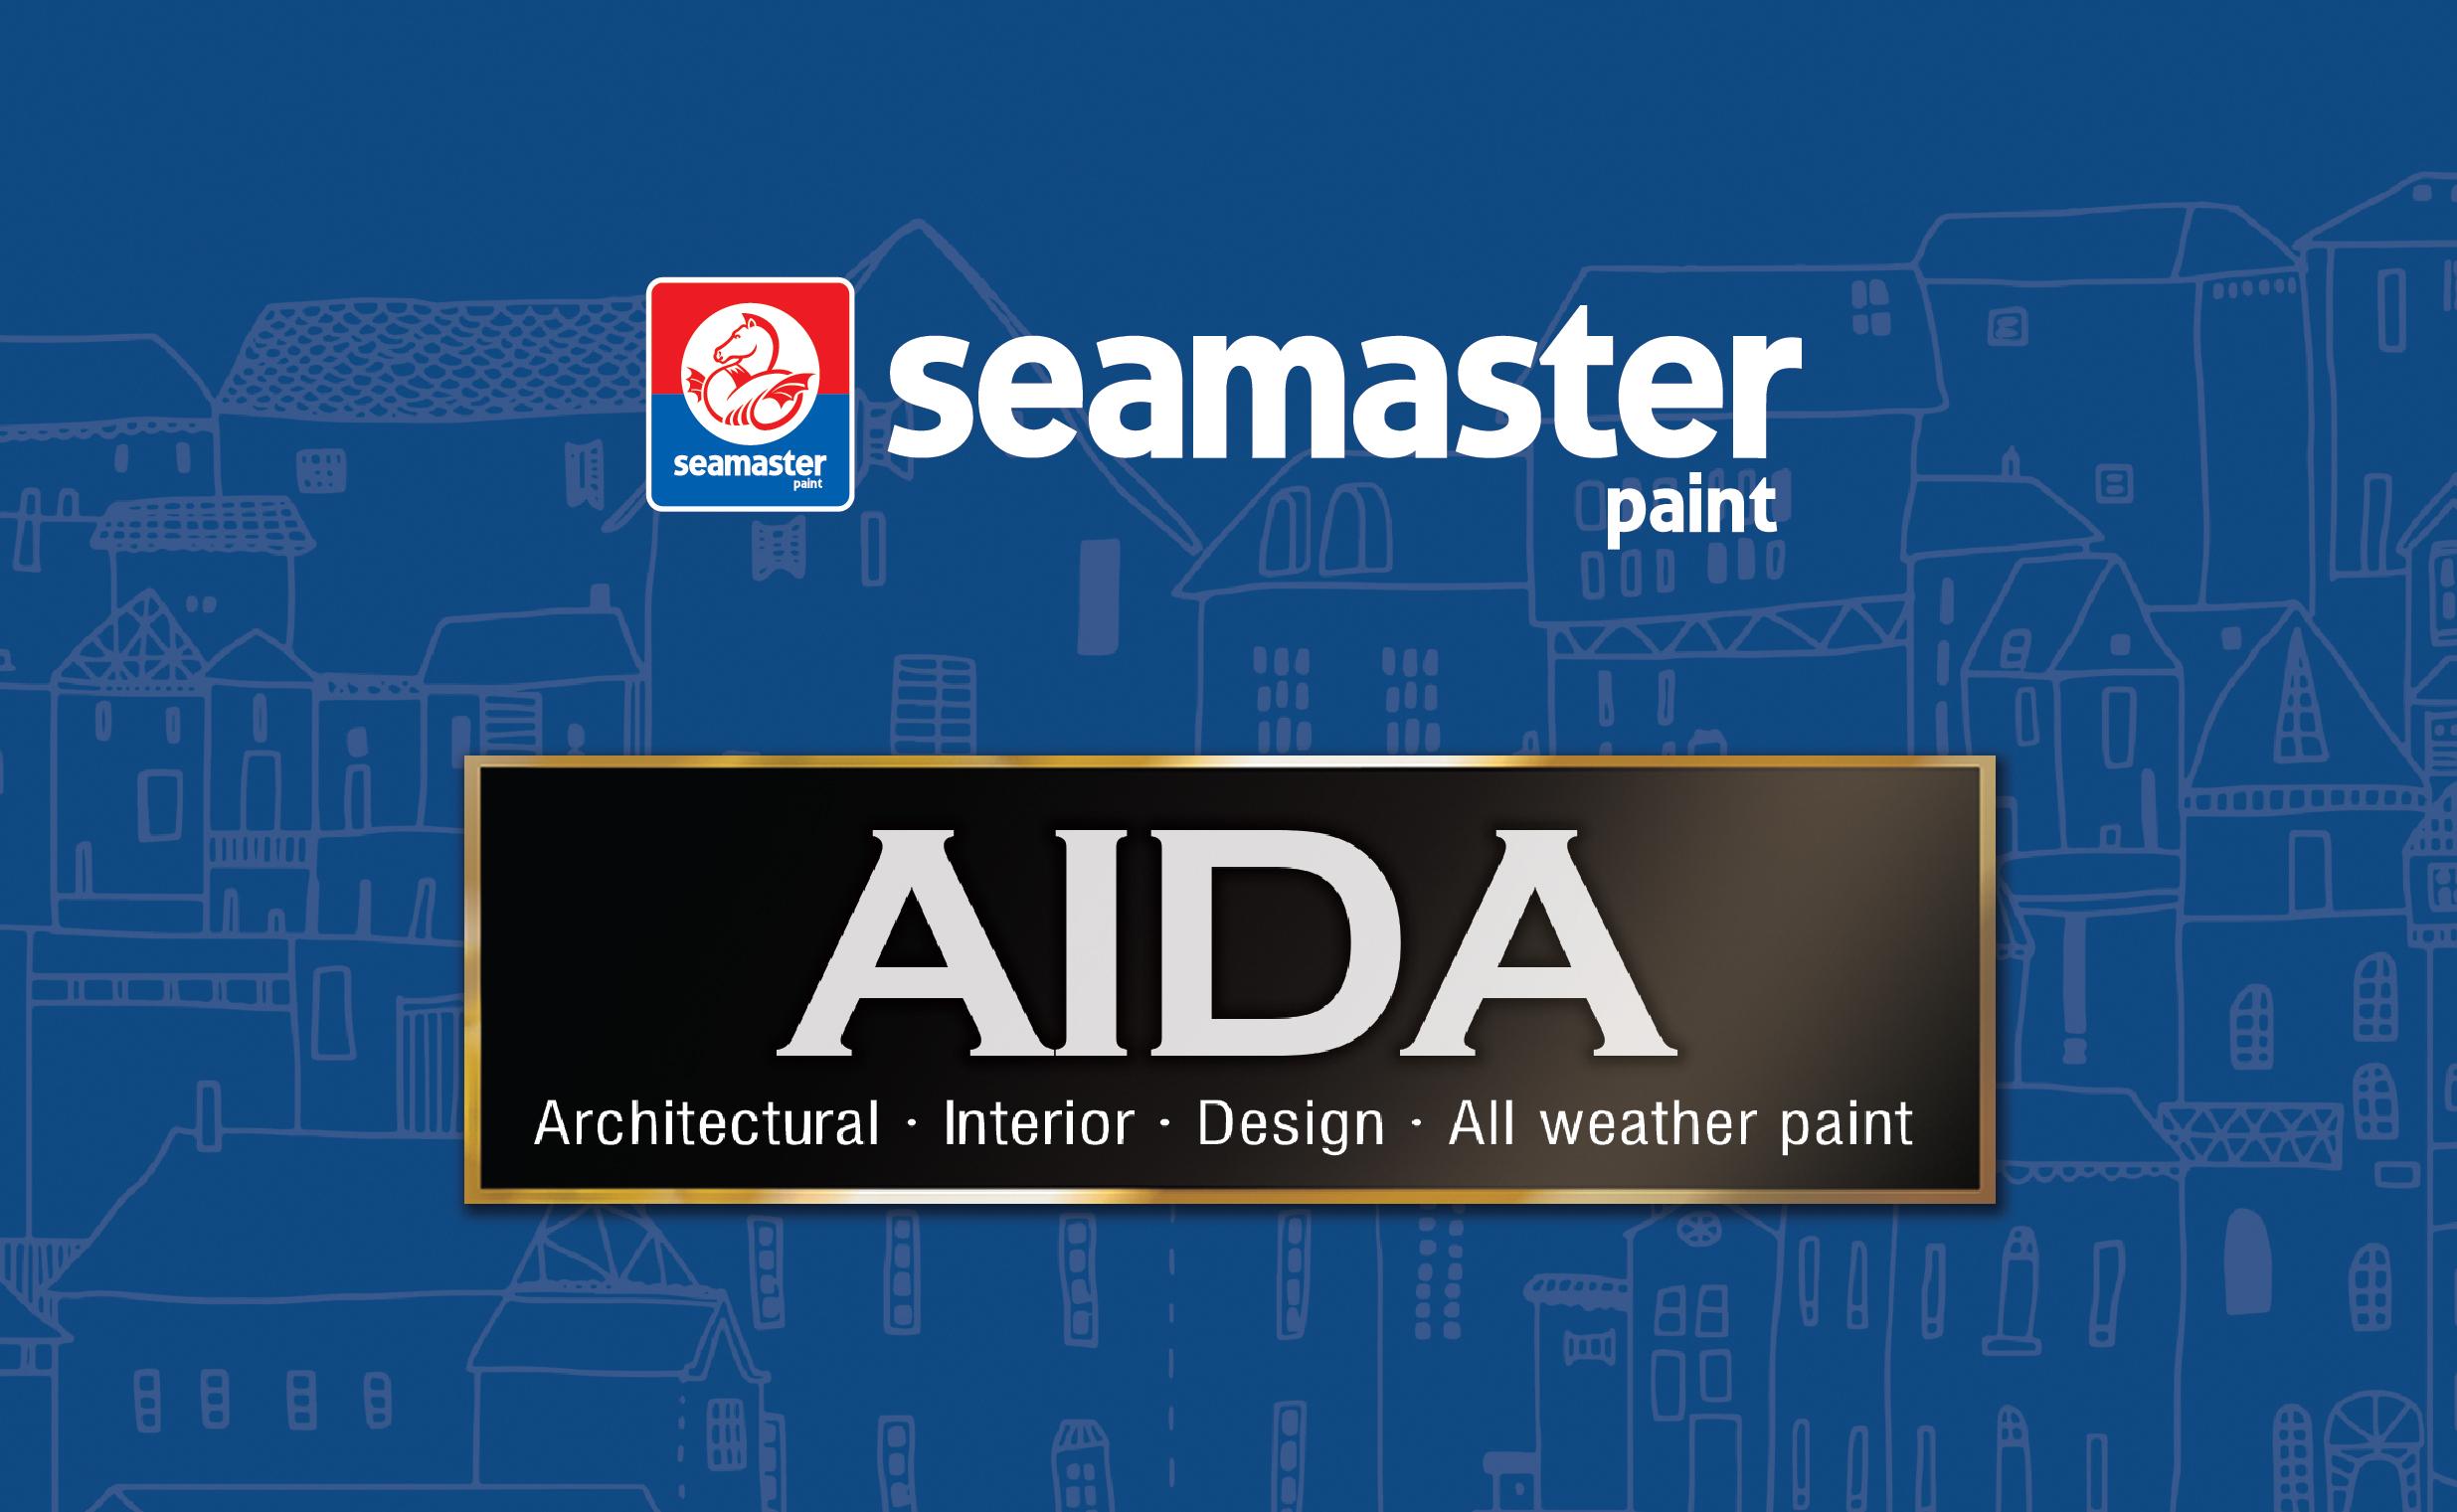 AIDA LAUNCHES NEW PRODUCTS TO BRING PROFESSIONAL CHOICE FOR CUSTOMERS